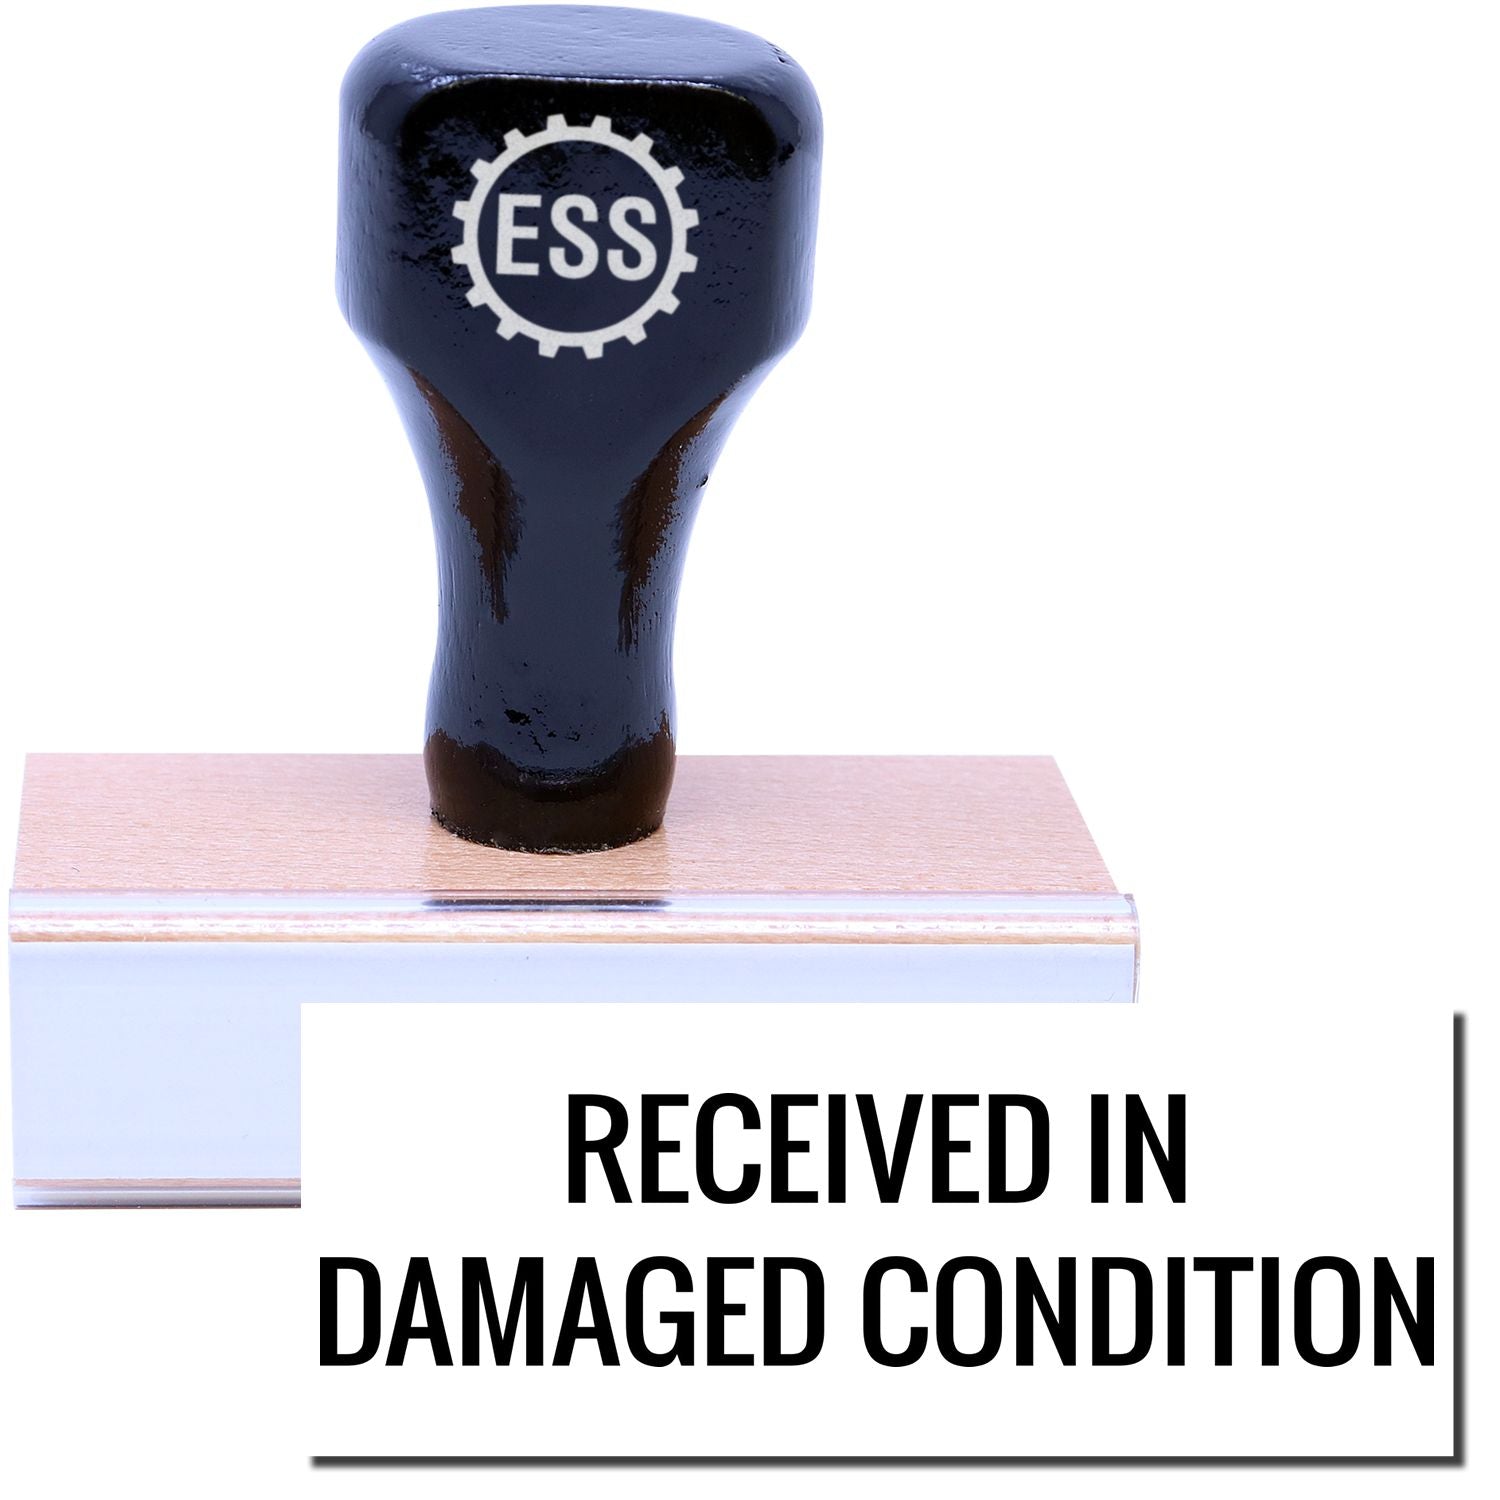 A stock office rubber stamp with a stamped image showing how the text "RECEIVED IN DAMAGED CONDITION" in a large font is displayed after stamping.